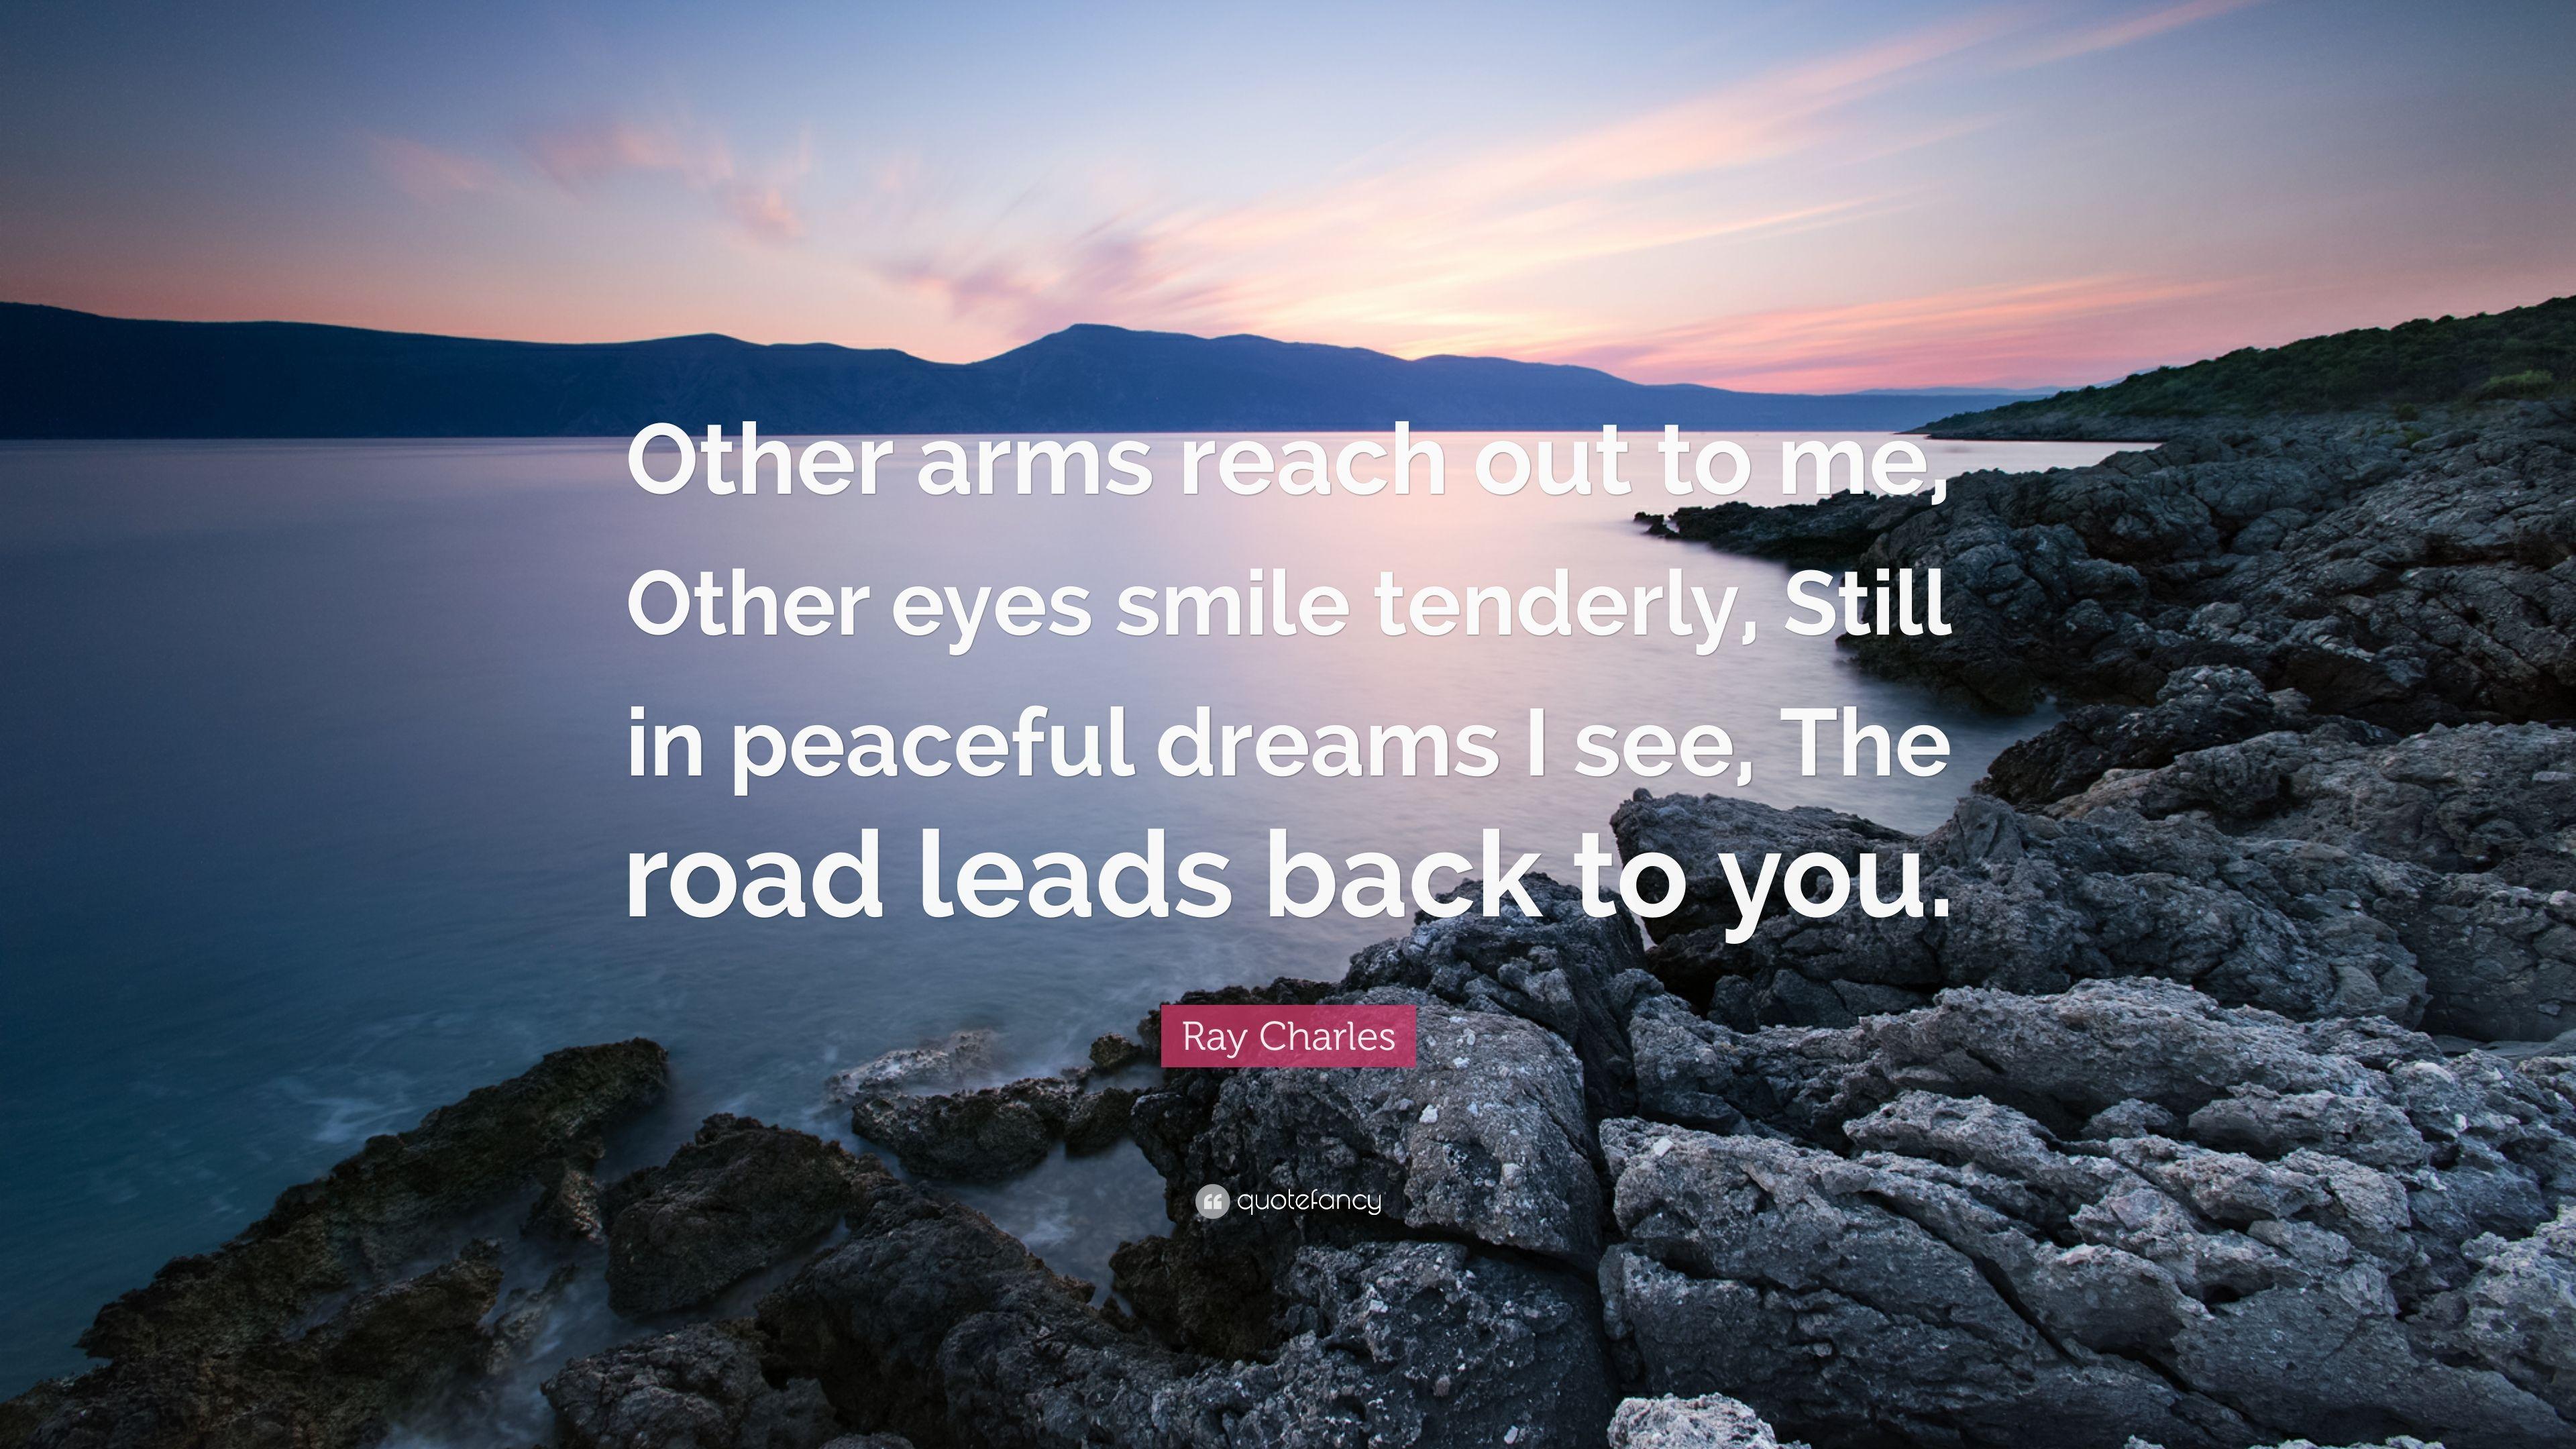 Ray Charles Quote: “Other arms reach out to me, Other eyes smile